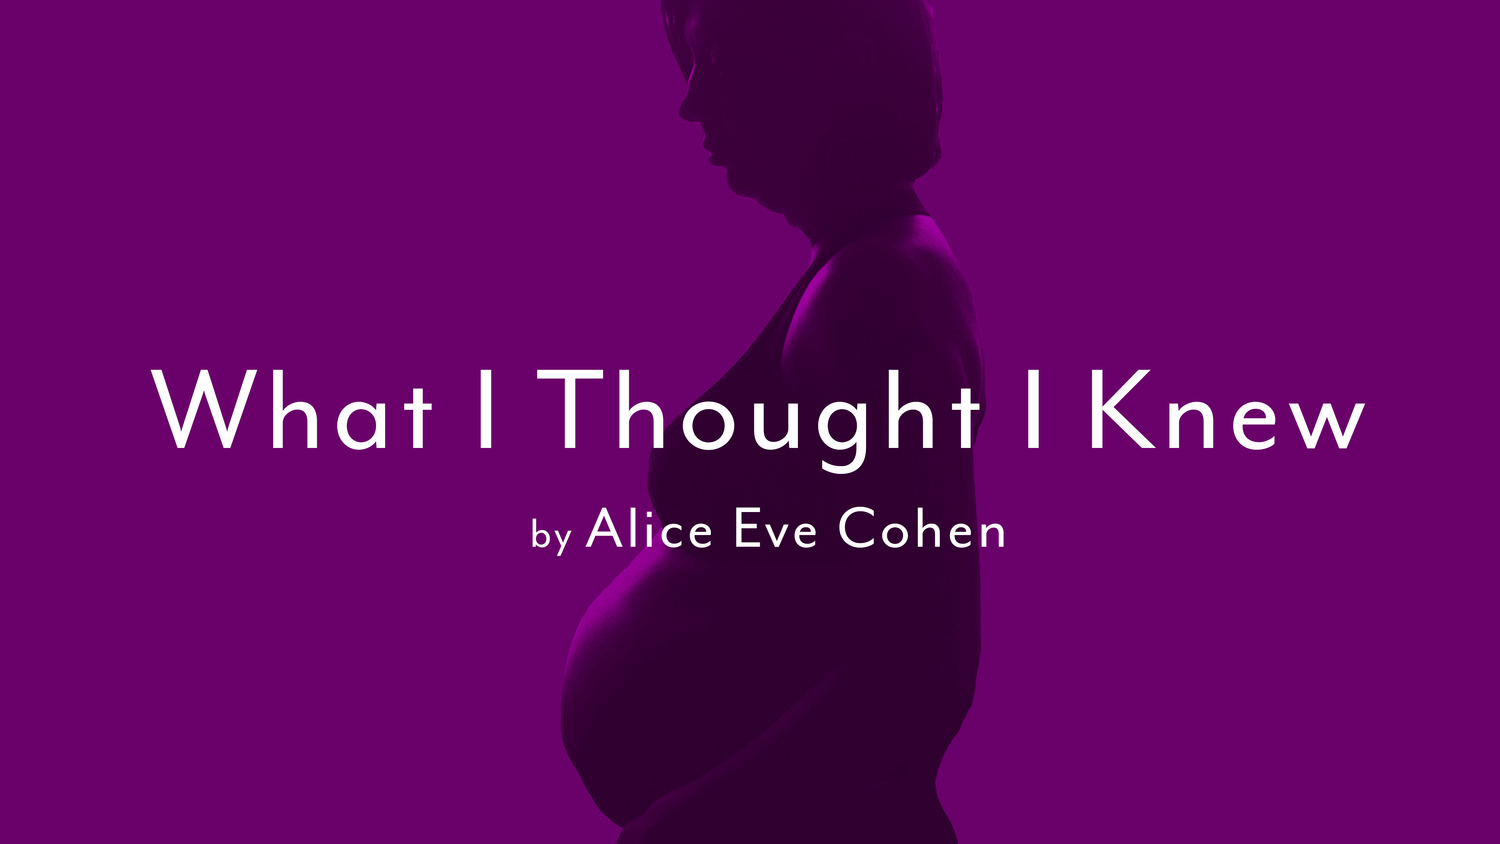 MJTC Opens Season with Kim Kivens in a Solo Performance on Women's Health 